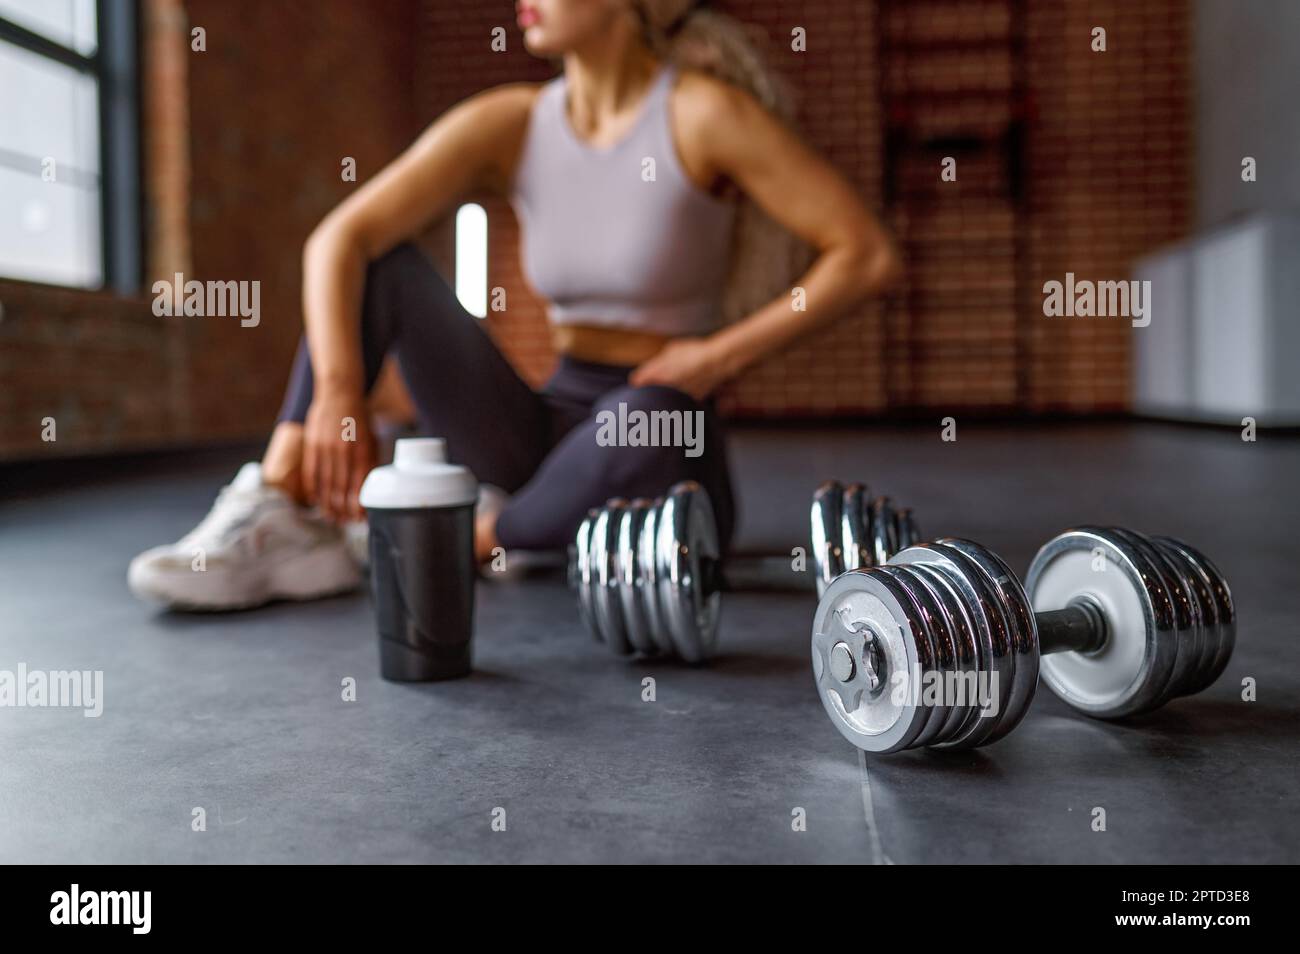 Tired athlete woman taking rest after intense training sitting on floor at gym sportclub Stock Photo